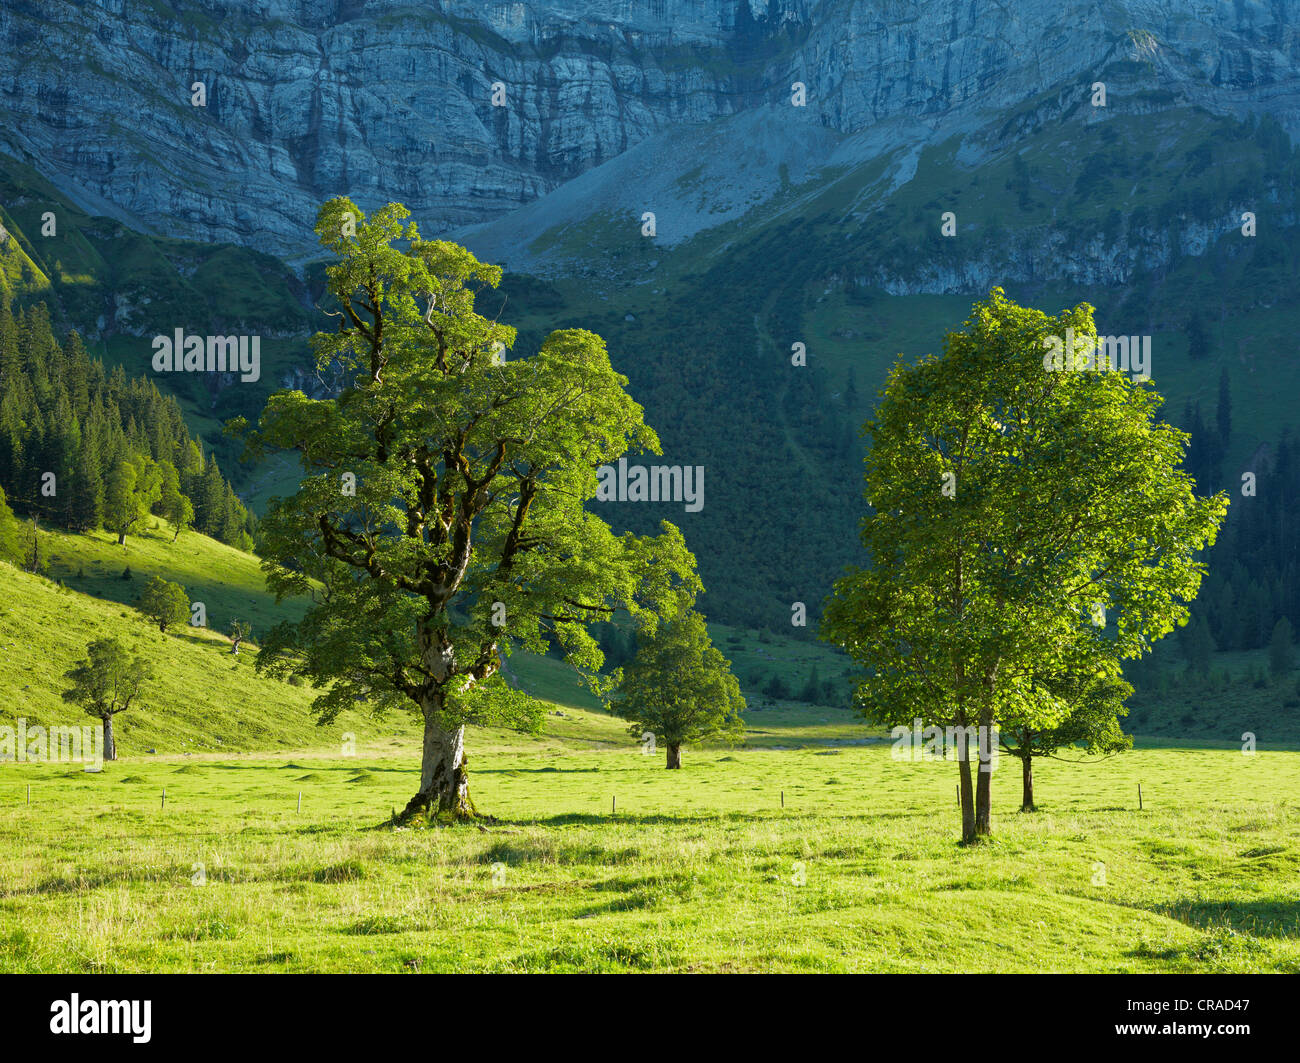 Maple trees (Acer), Ahornboden, mountain pasture with old maple trees, near Hinterriss, Risstal, Austria, Europe Stock Photo